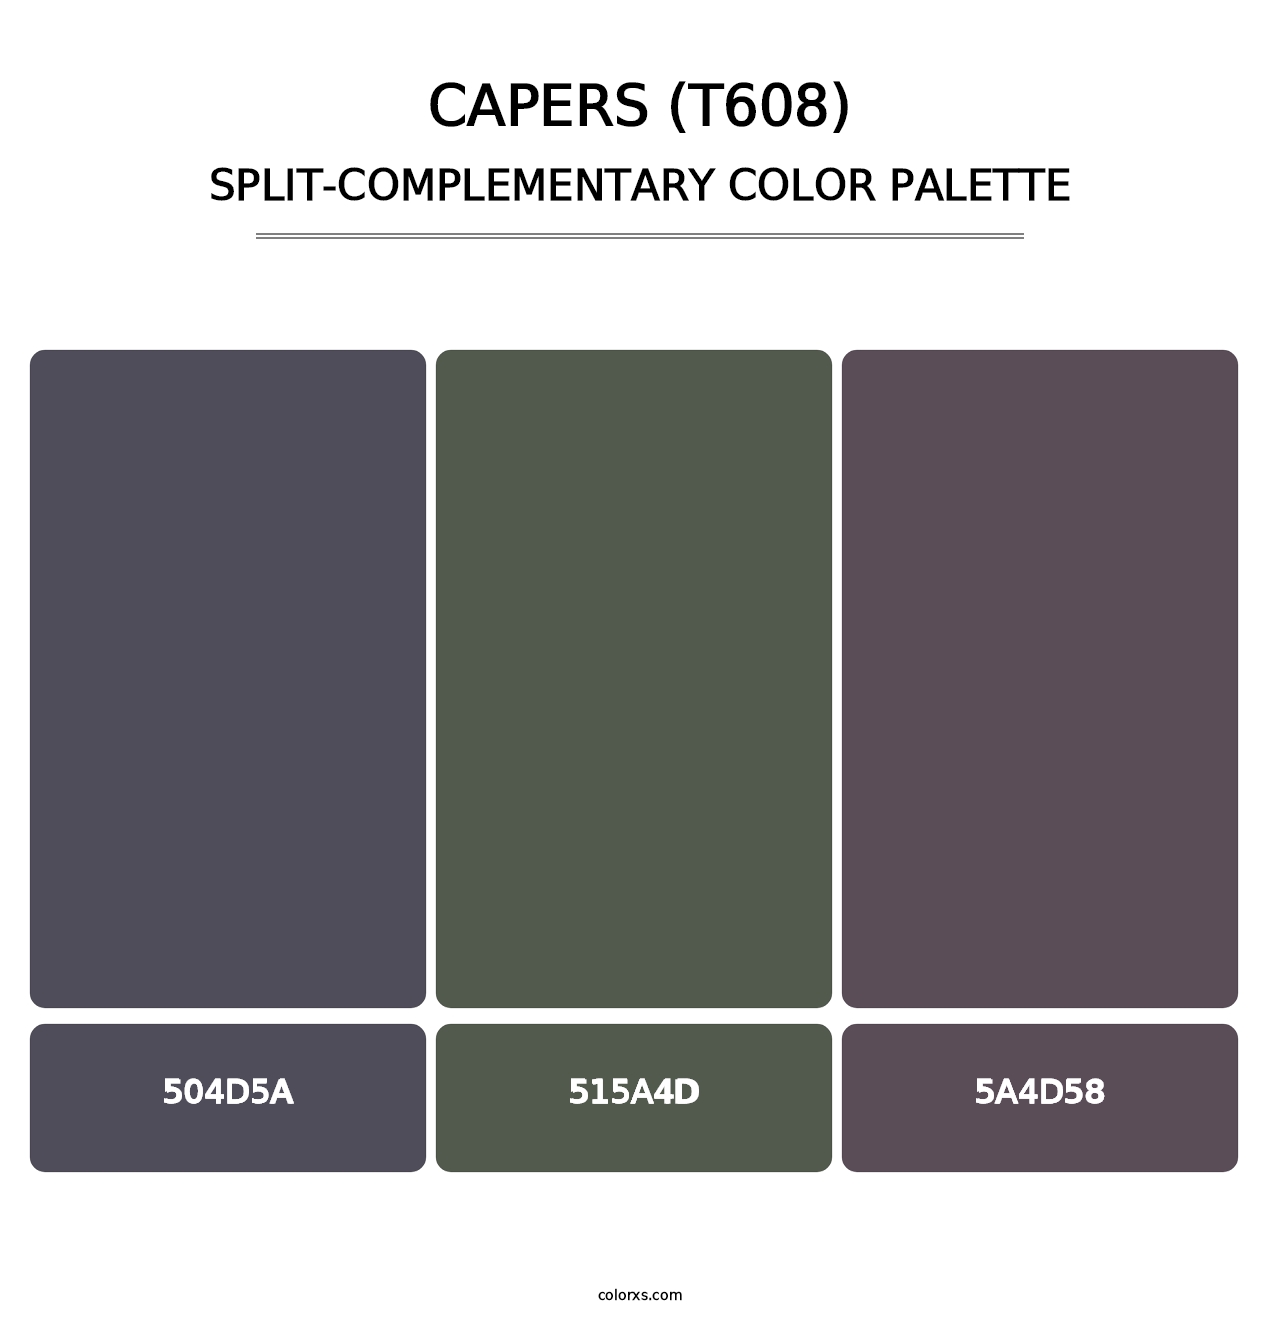 Capers (T608) - Split-Complementary Color Palette